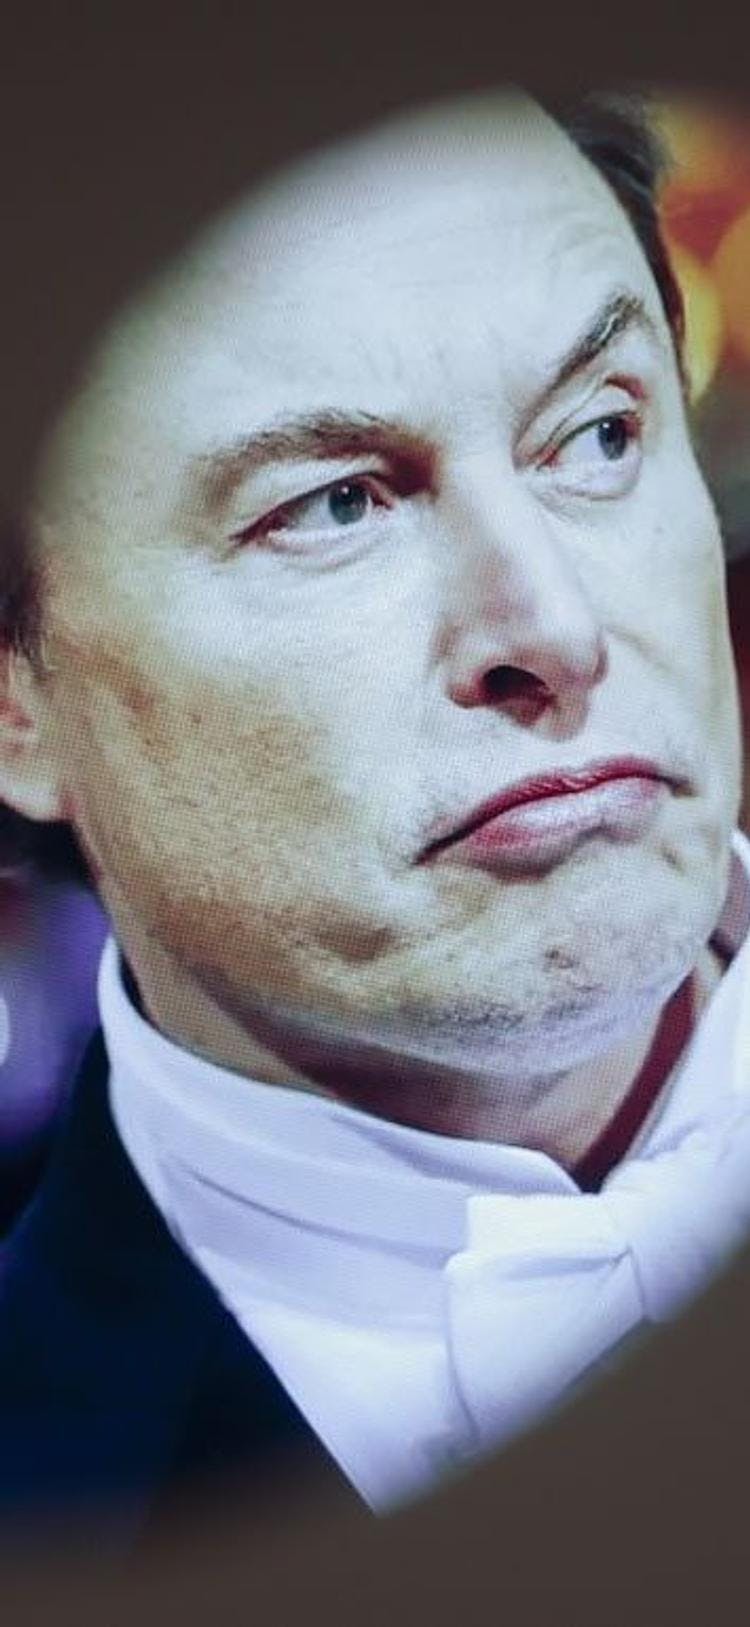 in december 2022, elon musk accused former twitter exec yoel roth of being pro-child exploitation. bloomberg wrote this claim was “baseless” -- and similar to other far-right claims that the lgbtq community “groom” kids